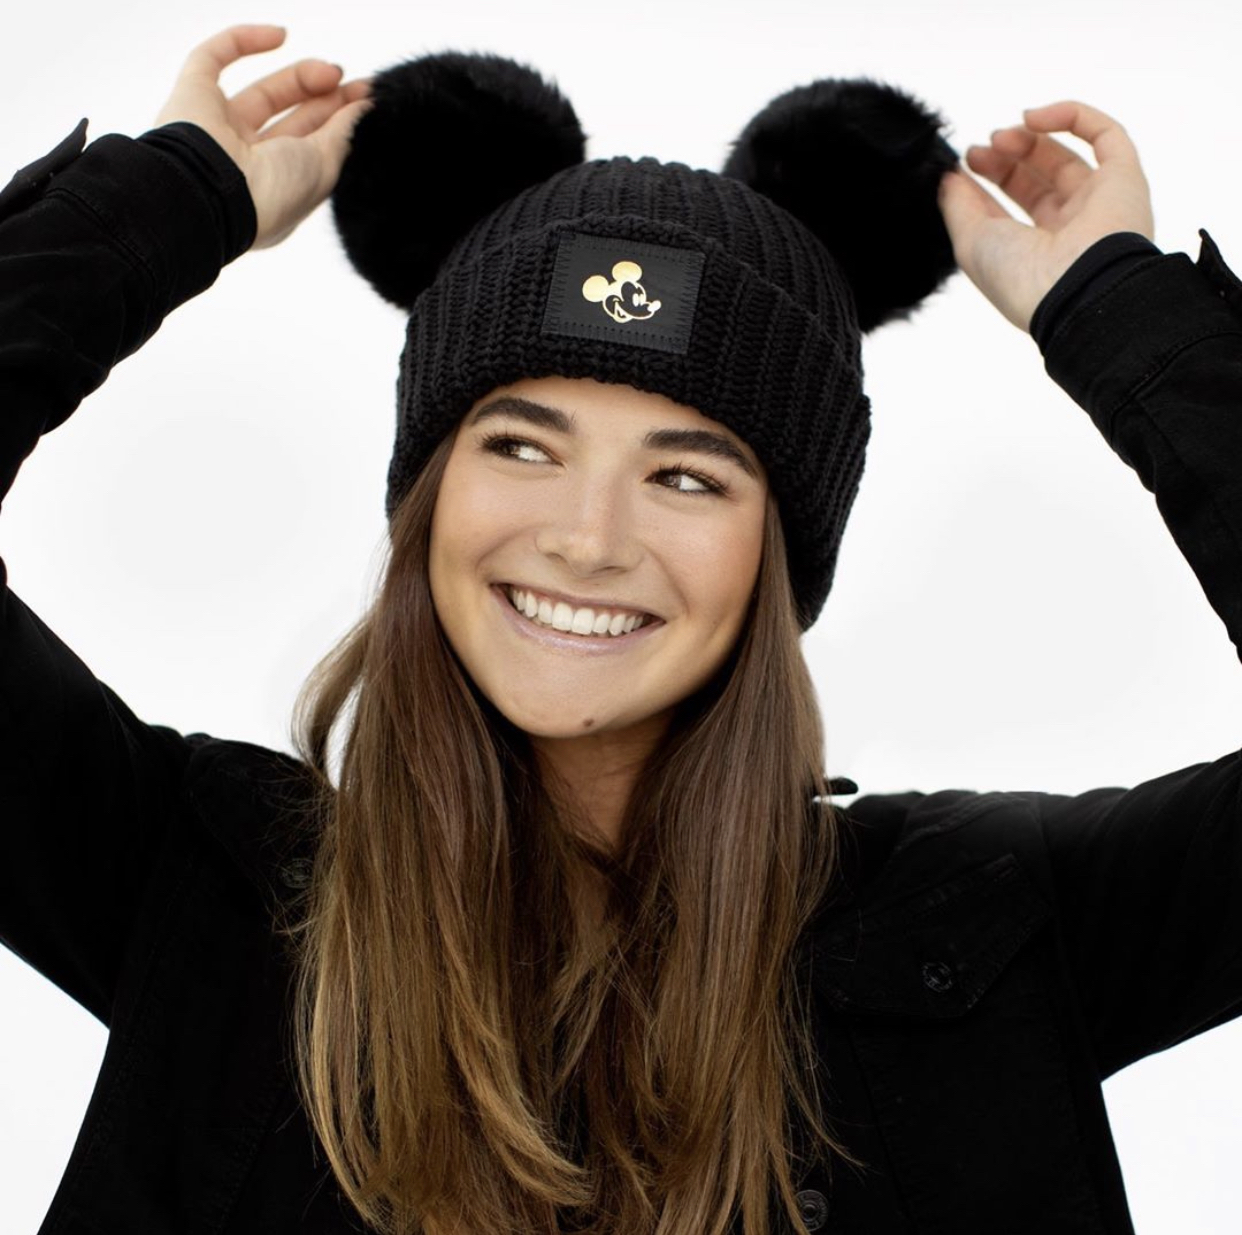 HURRY: This New Disney x Love Your Melon Collection Will Probably Sell Out  Fast!